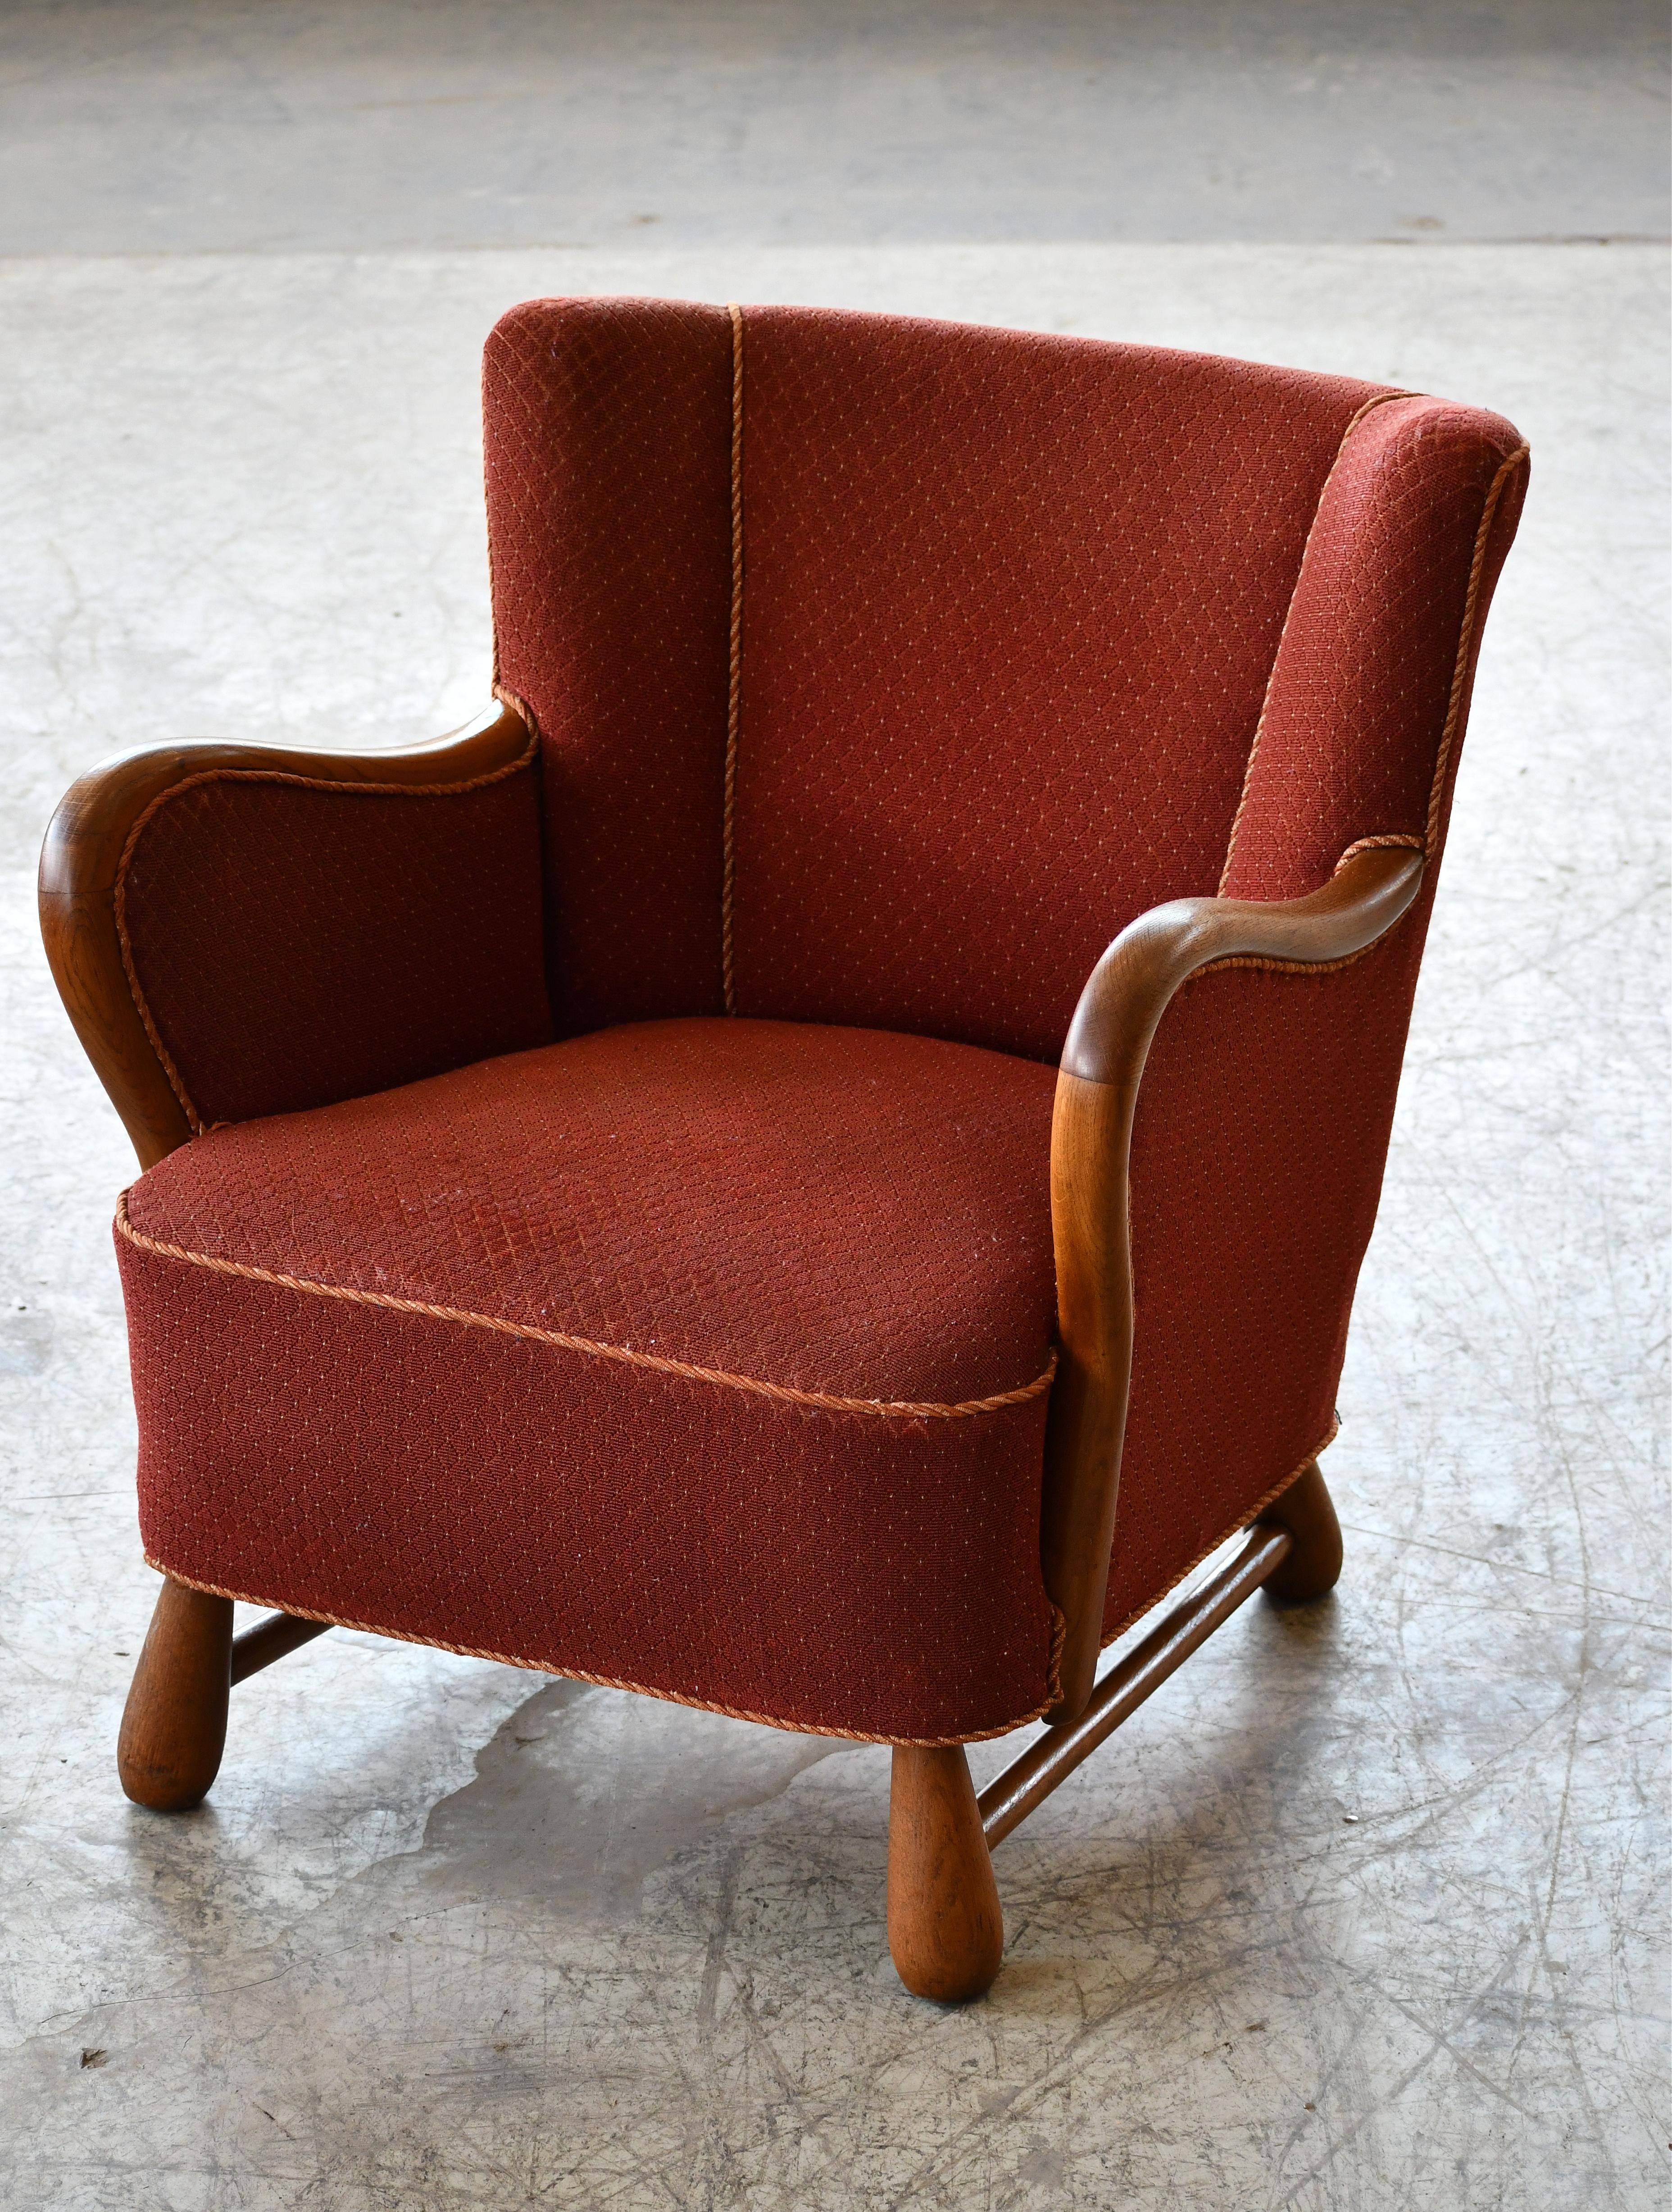 Wool Rare Danish Easy Lounge Chair in Mahogany Attributed to Otto Færge, 1940's For Sale